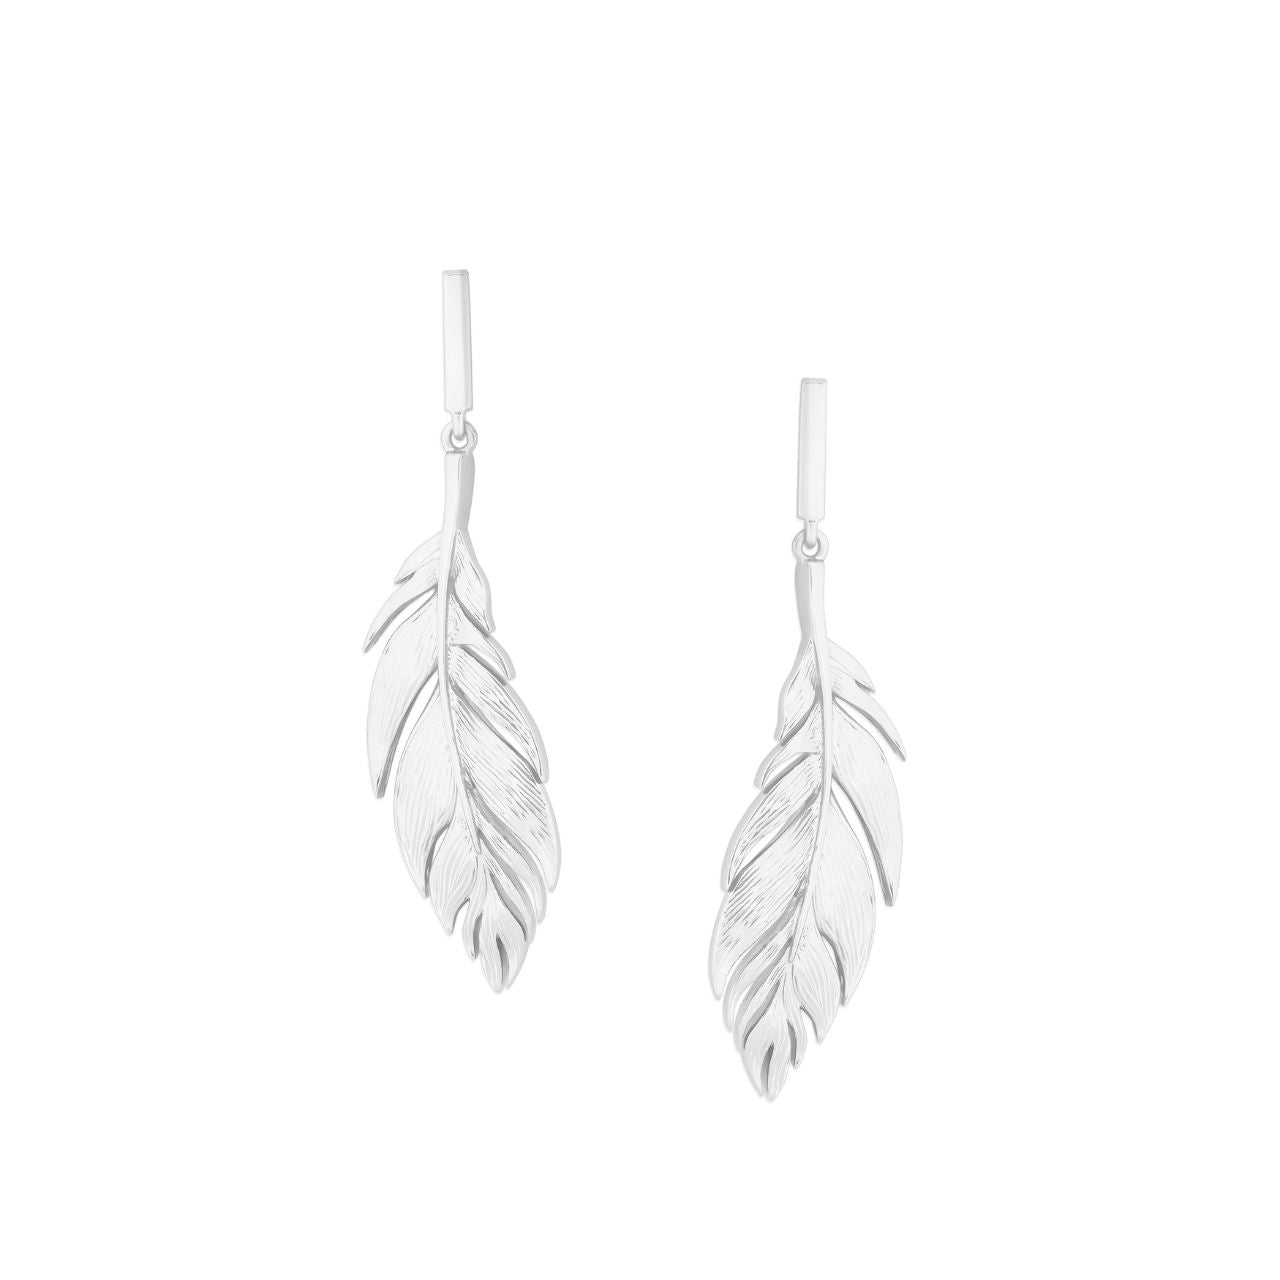 Silver Feather Simple Drop Earrings by Tipperary  The Tipperary Feather Simple Drop Earrings are an elegant accessory crafted with quality silver for everyday wear. The design features a conspicuous feather pattern, adding a subtle, yet stylish touch to any look. These earrings are the perfect way to complete any outfit.